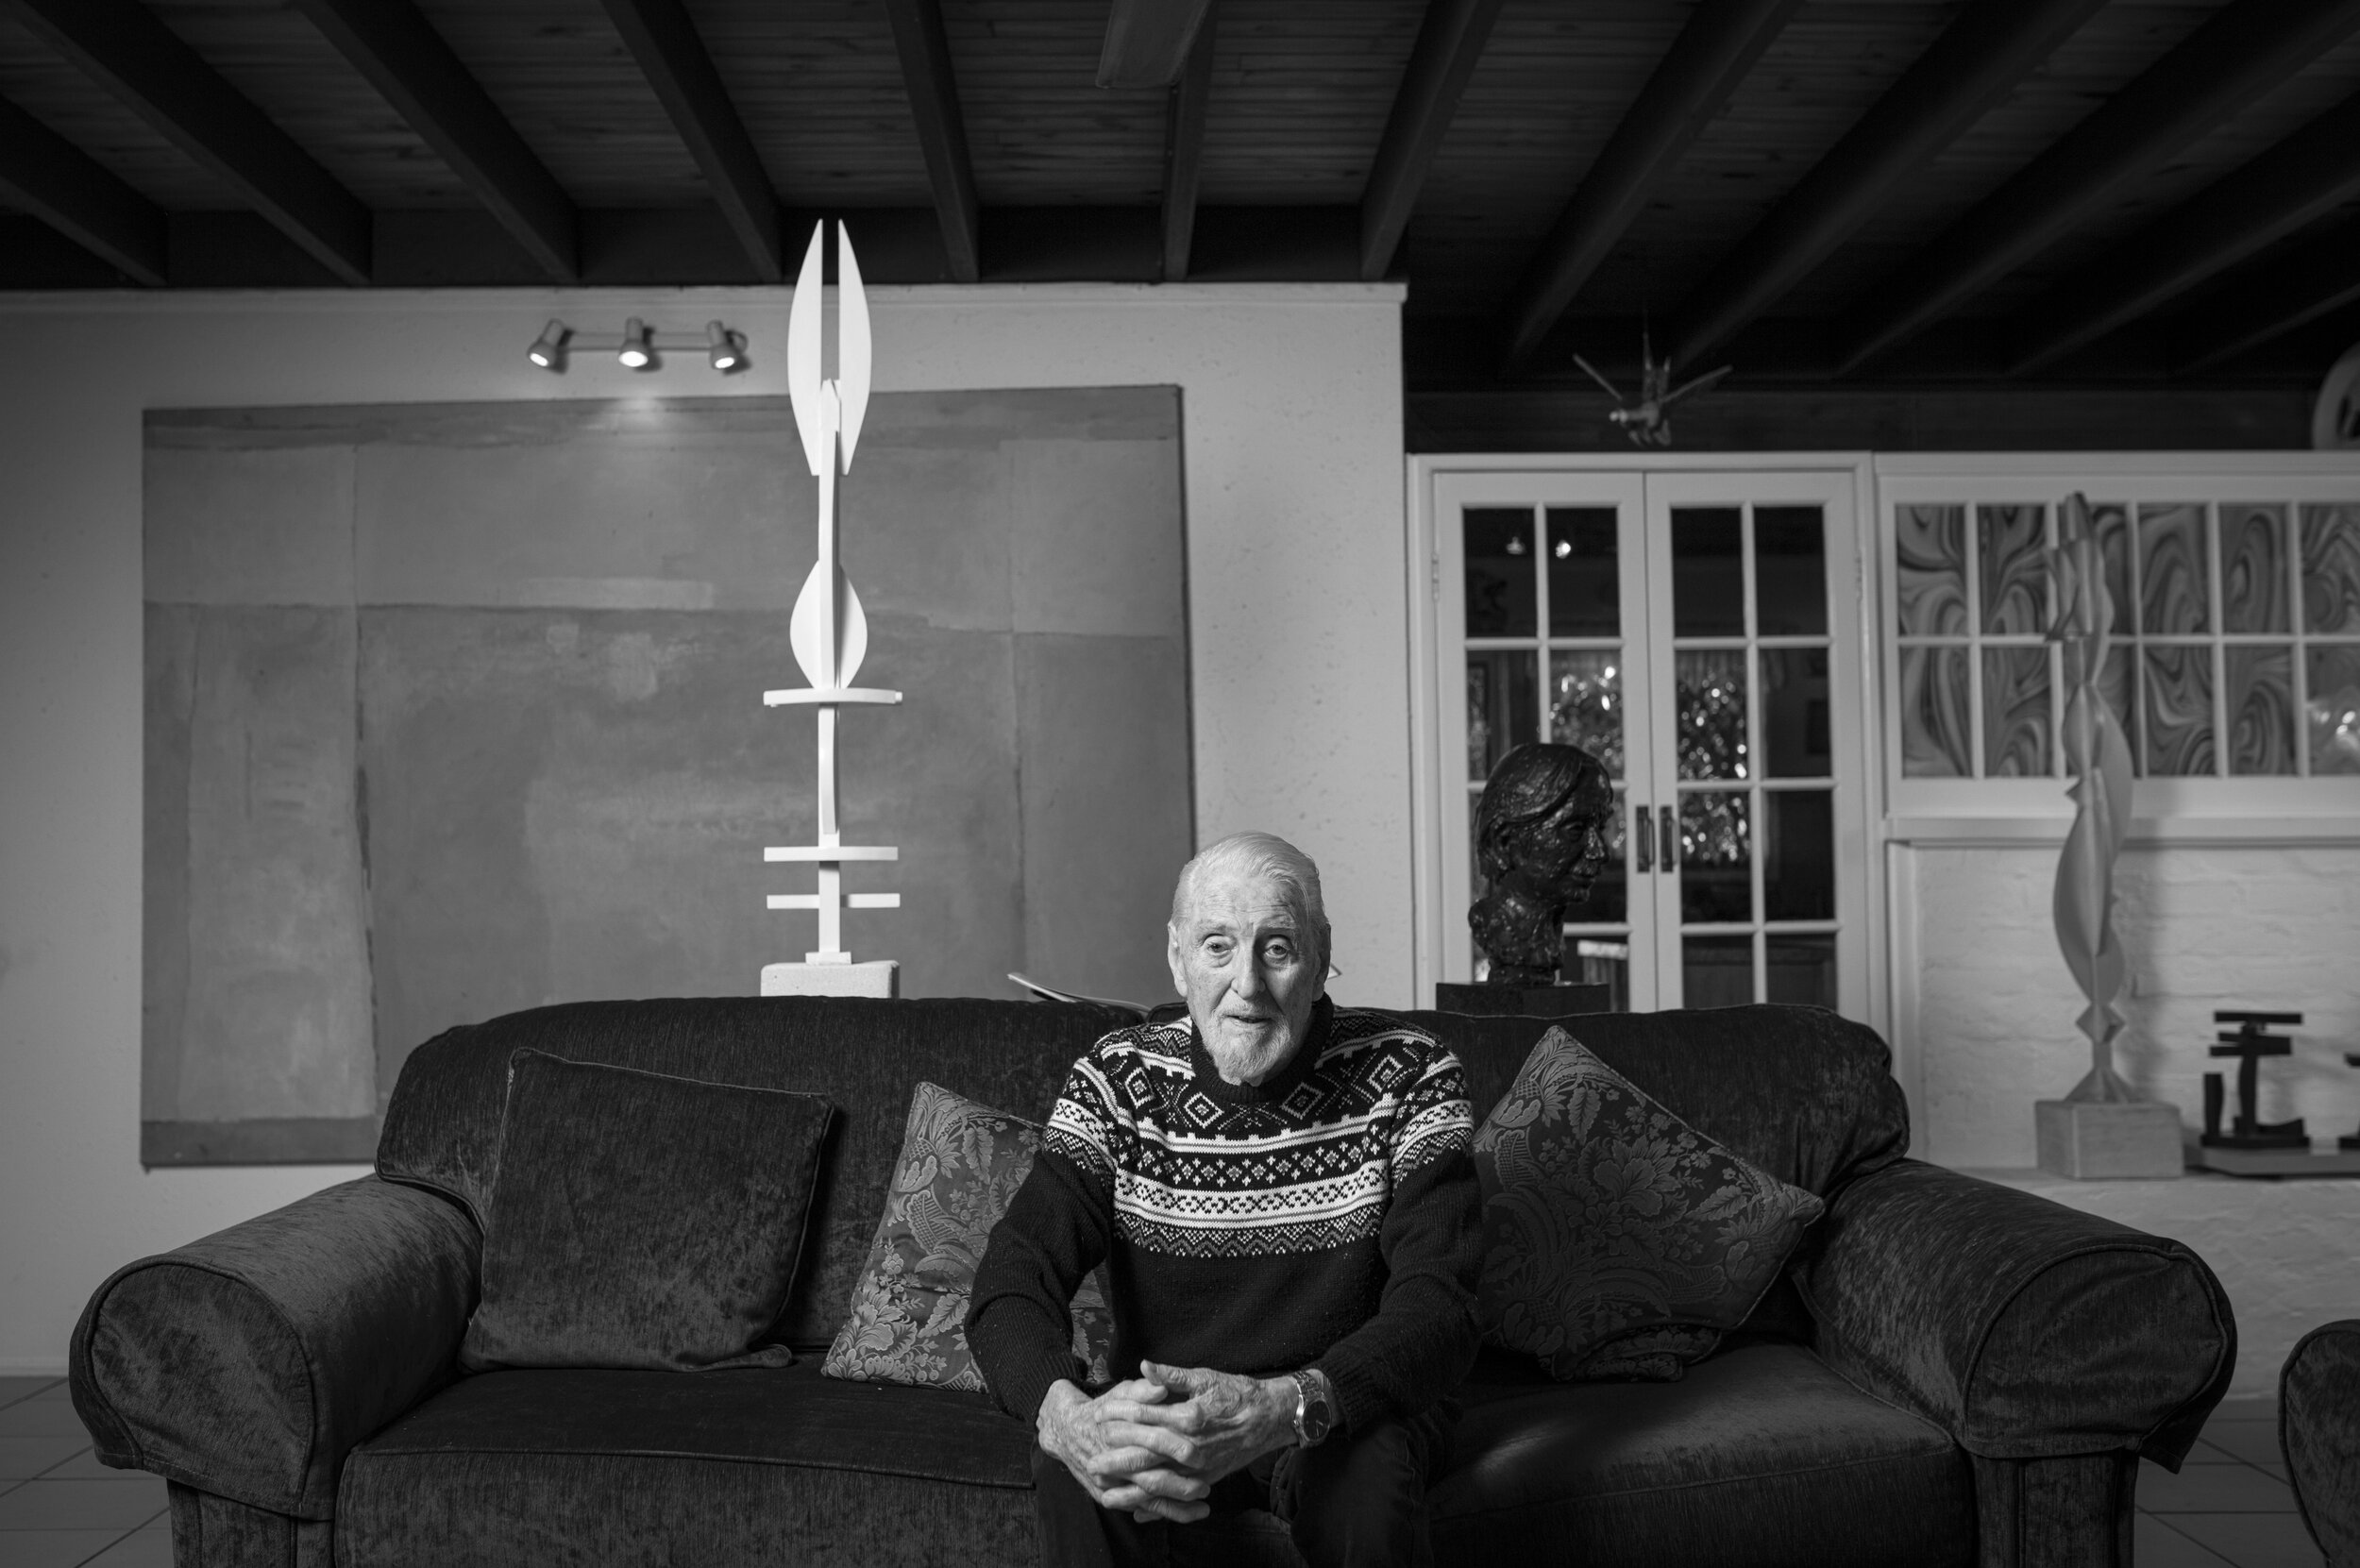  The Artist Marc Clark photographed at Home in Deception Bay, Qld, Australia  